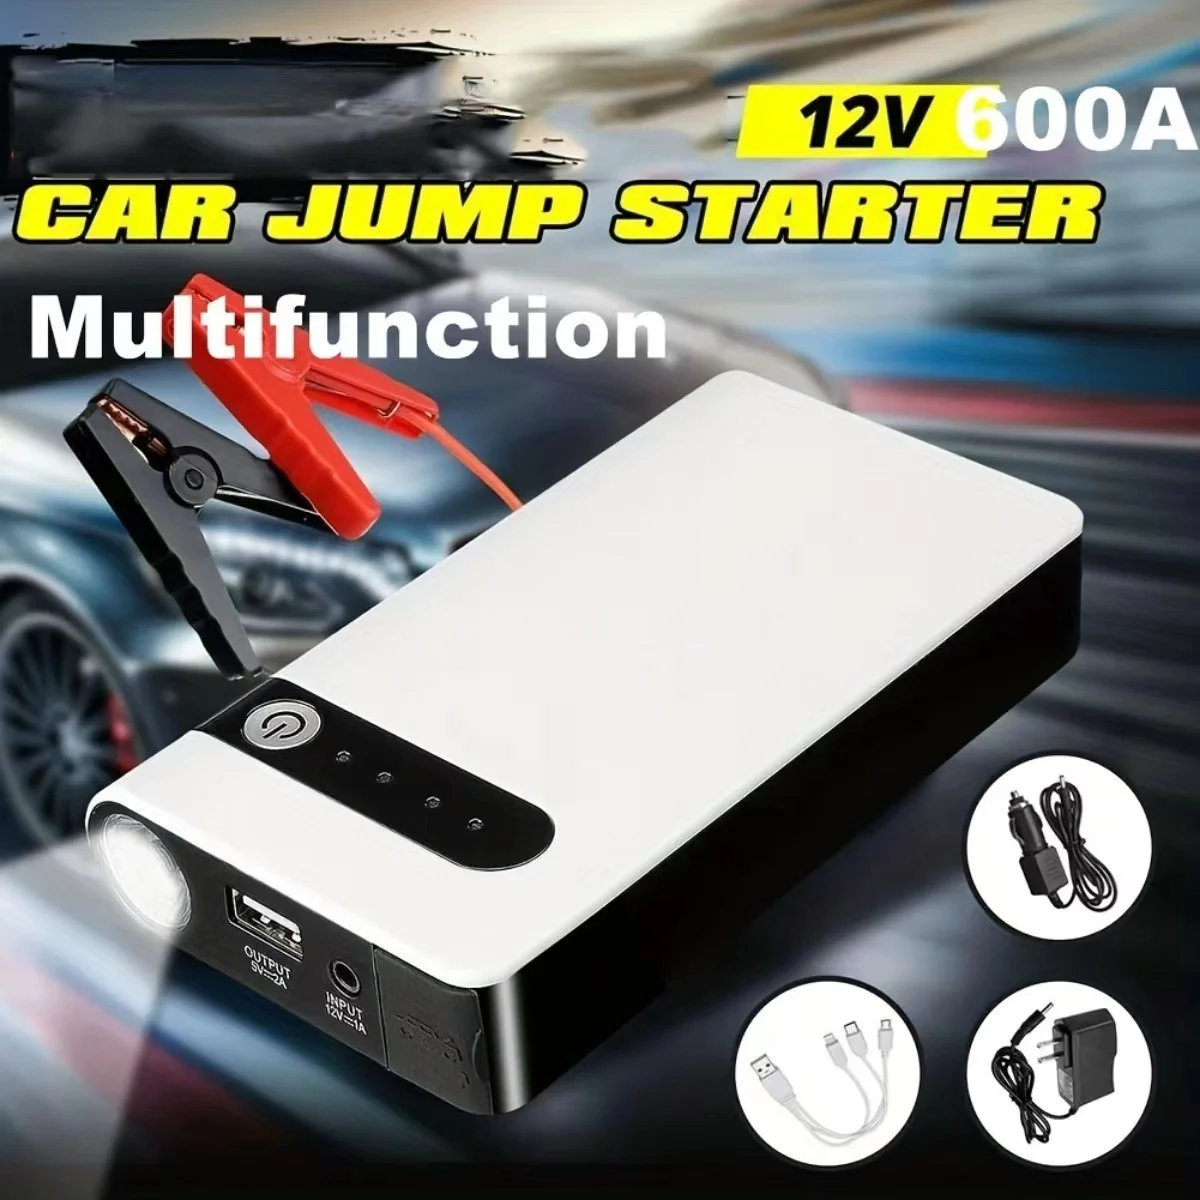 

12V 600A Car Jump Starter Emergency Battery Booster Quick Start Power Bank With LED Flashlight Charger For Phone